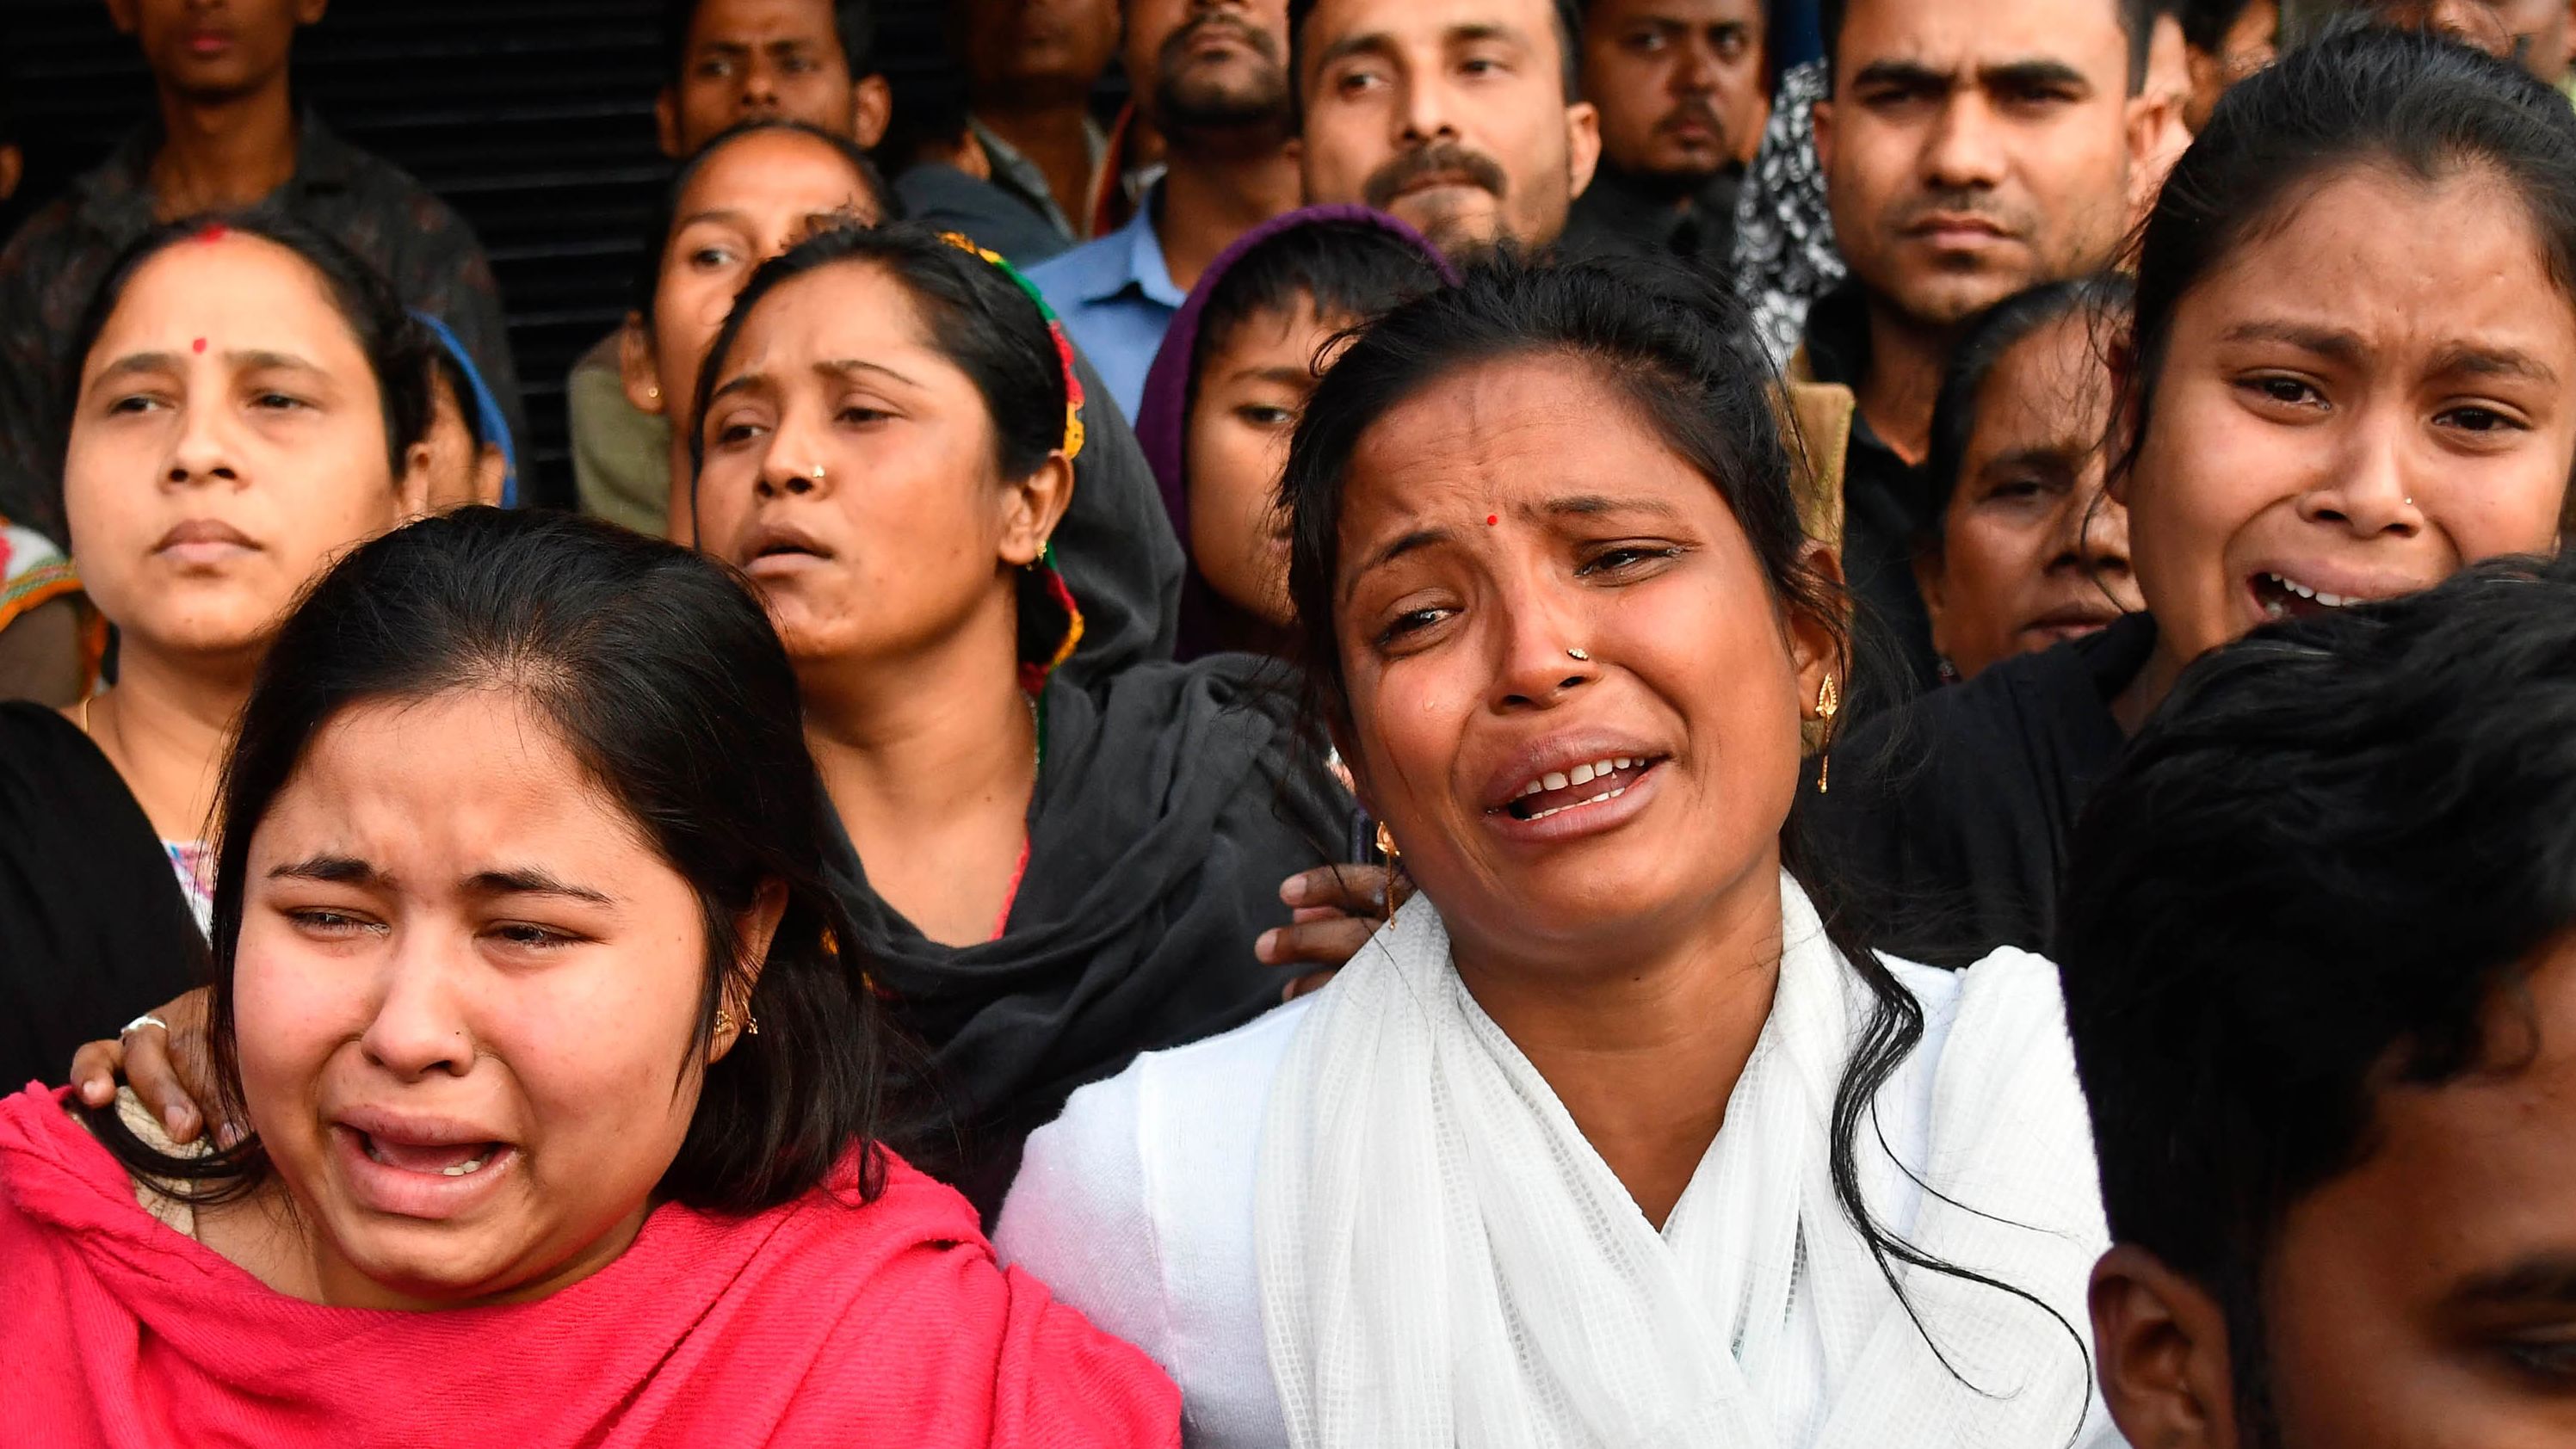 Relatives of Sam Stafford, 18, who was killed during clashes with police the previous day, react in Guwahati on December 13.